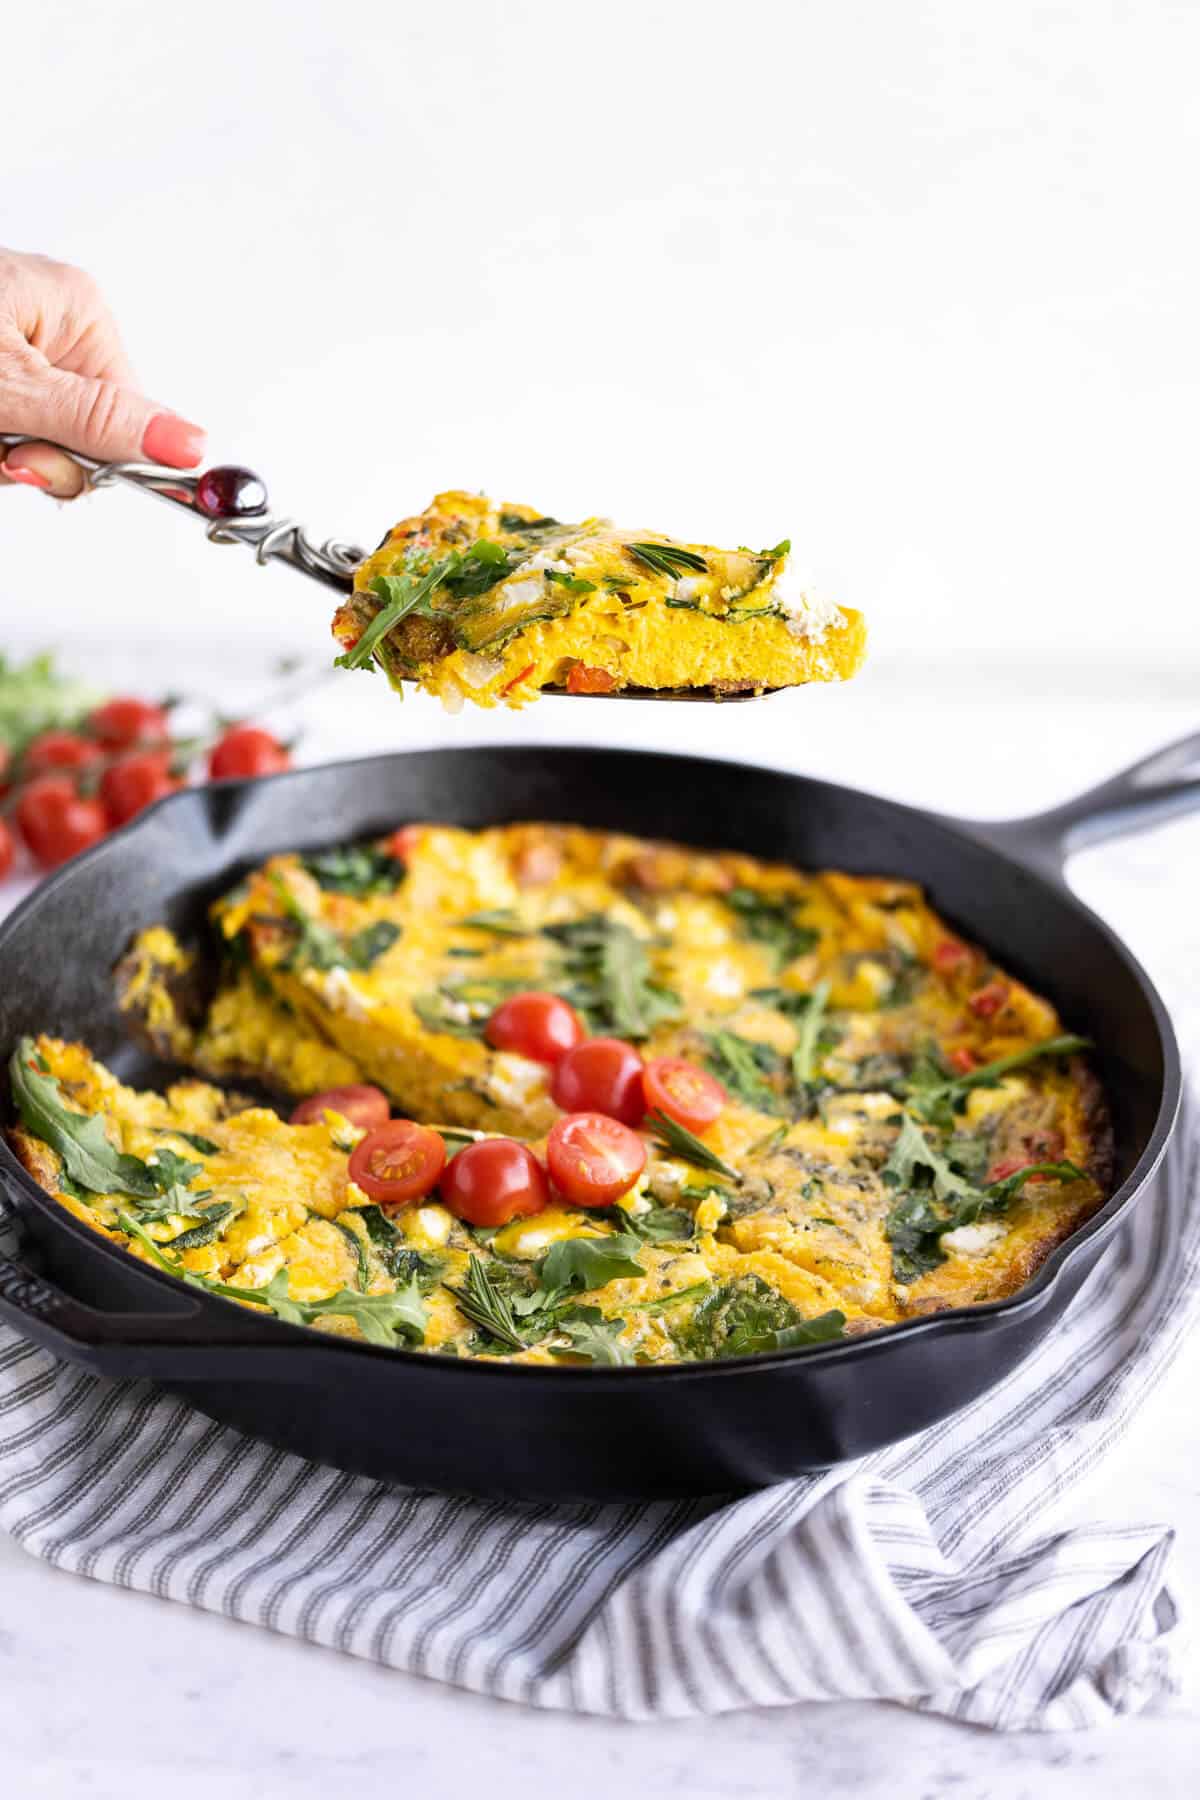 slice of frittata on a spatula being held above the whole frittata in a cast iron pan